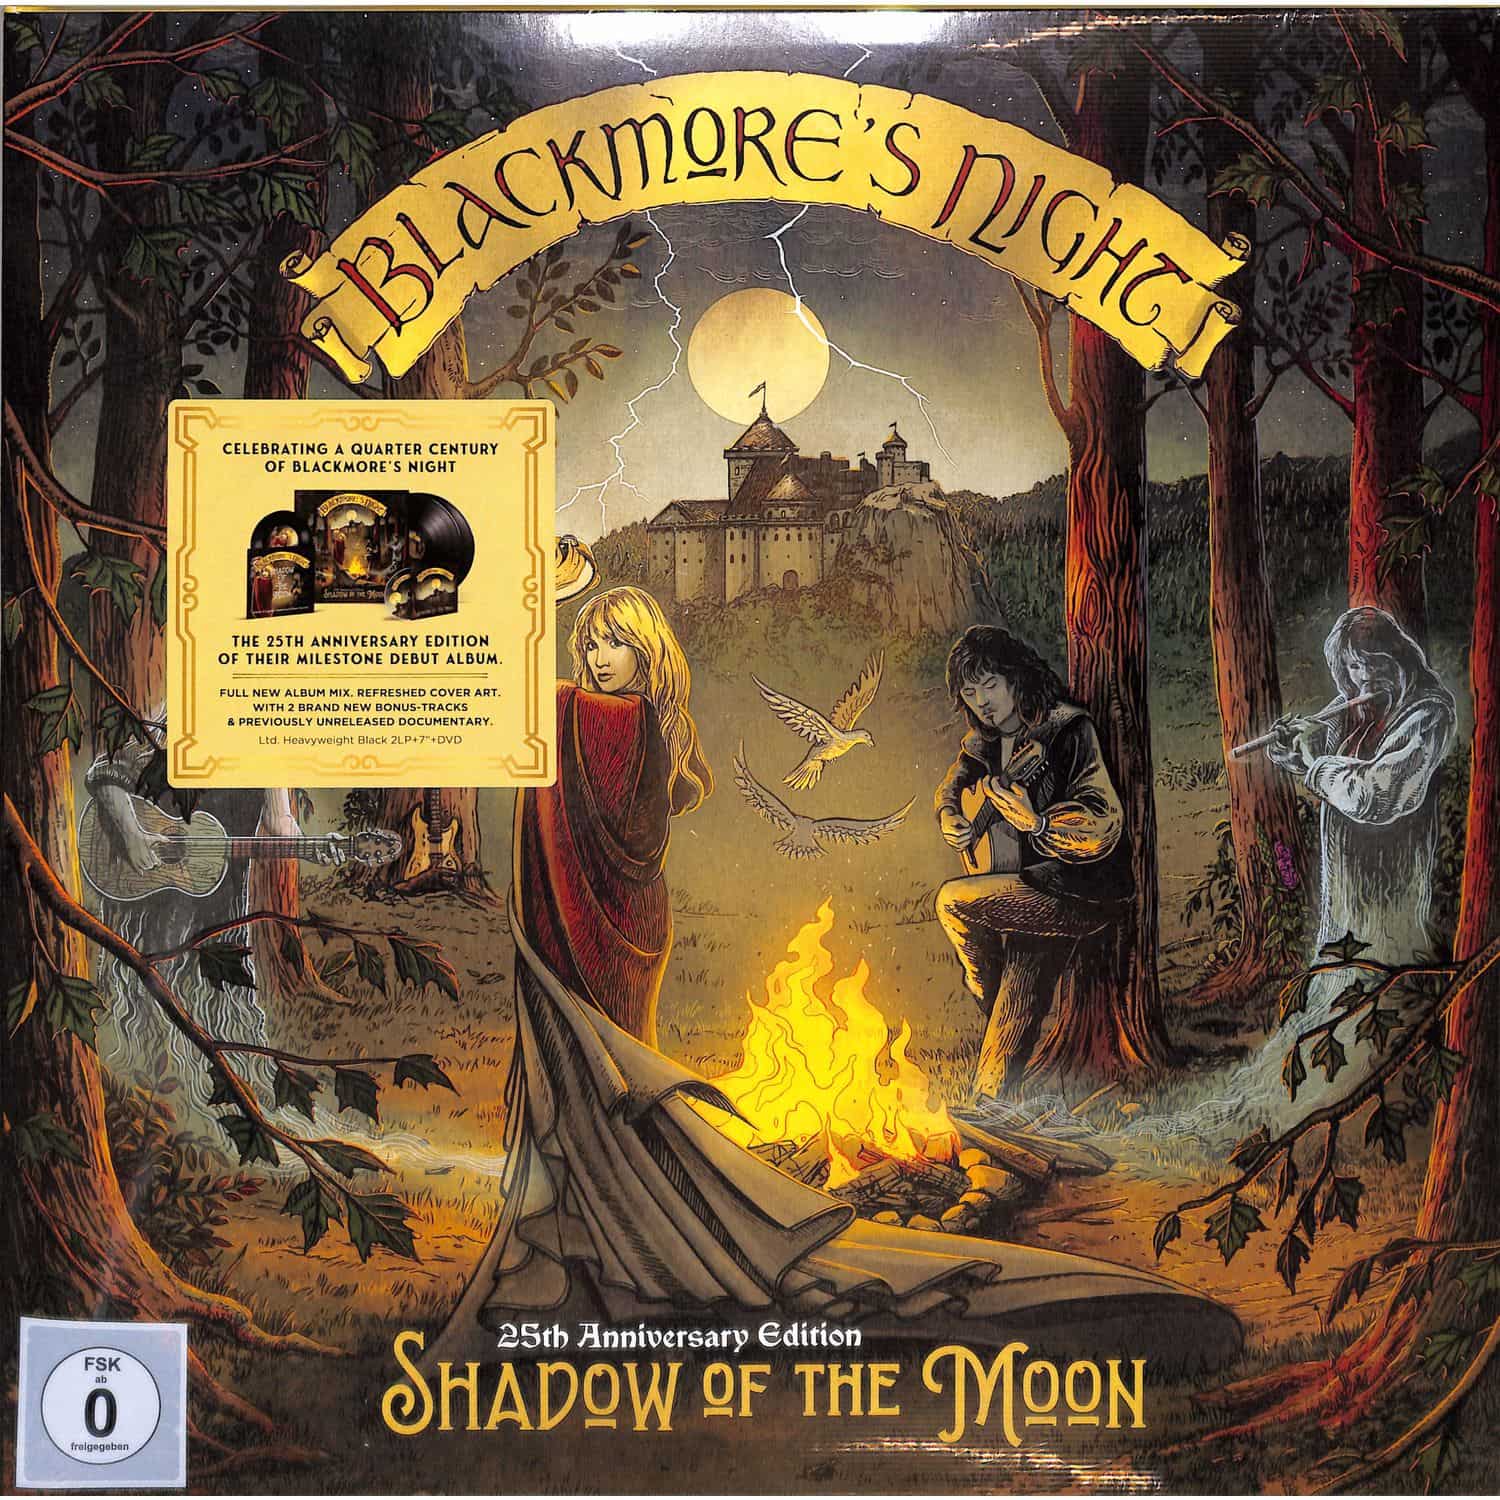 Blackmore s Night - SHADOW OF THE MOON 